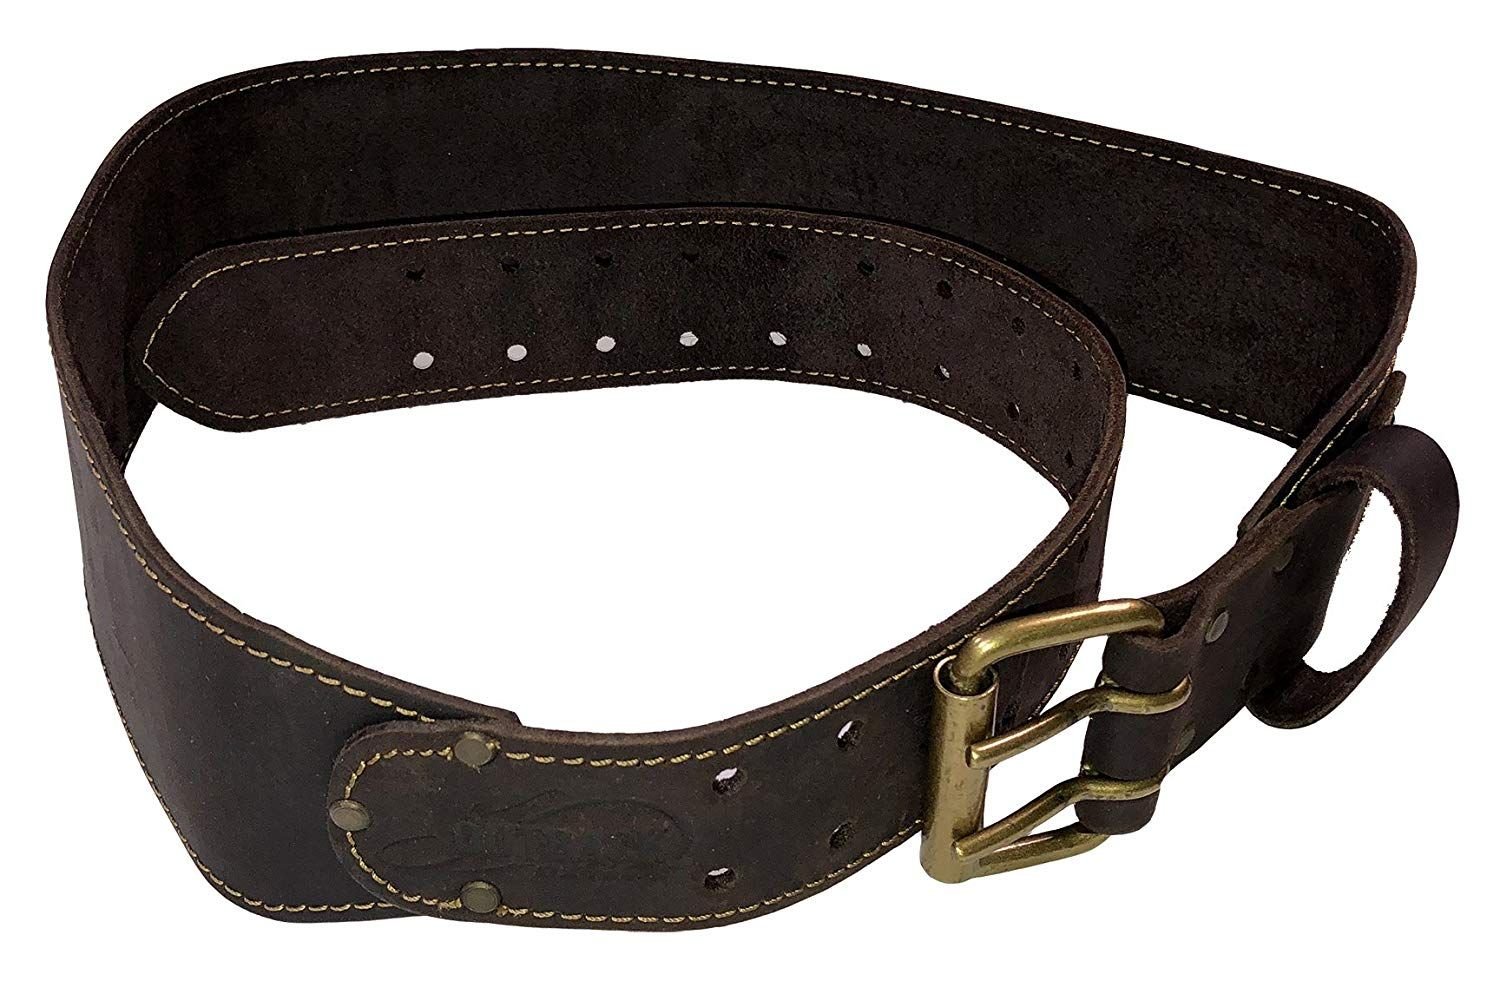 OX-P263303 - OX PRO 3-INCH TOOL BELT | OIL-TANNED LEATHER-LG